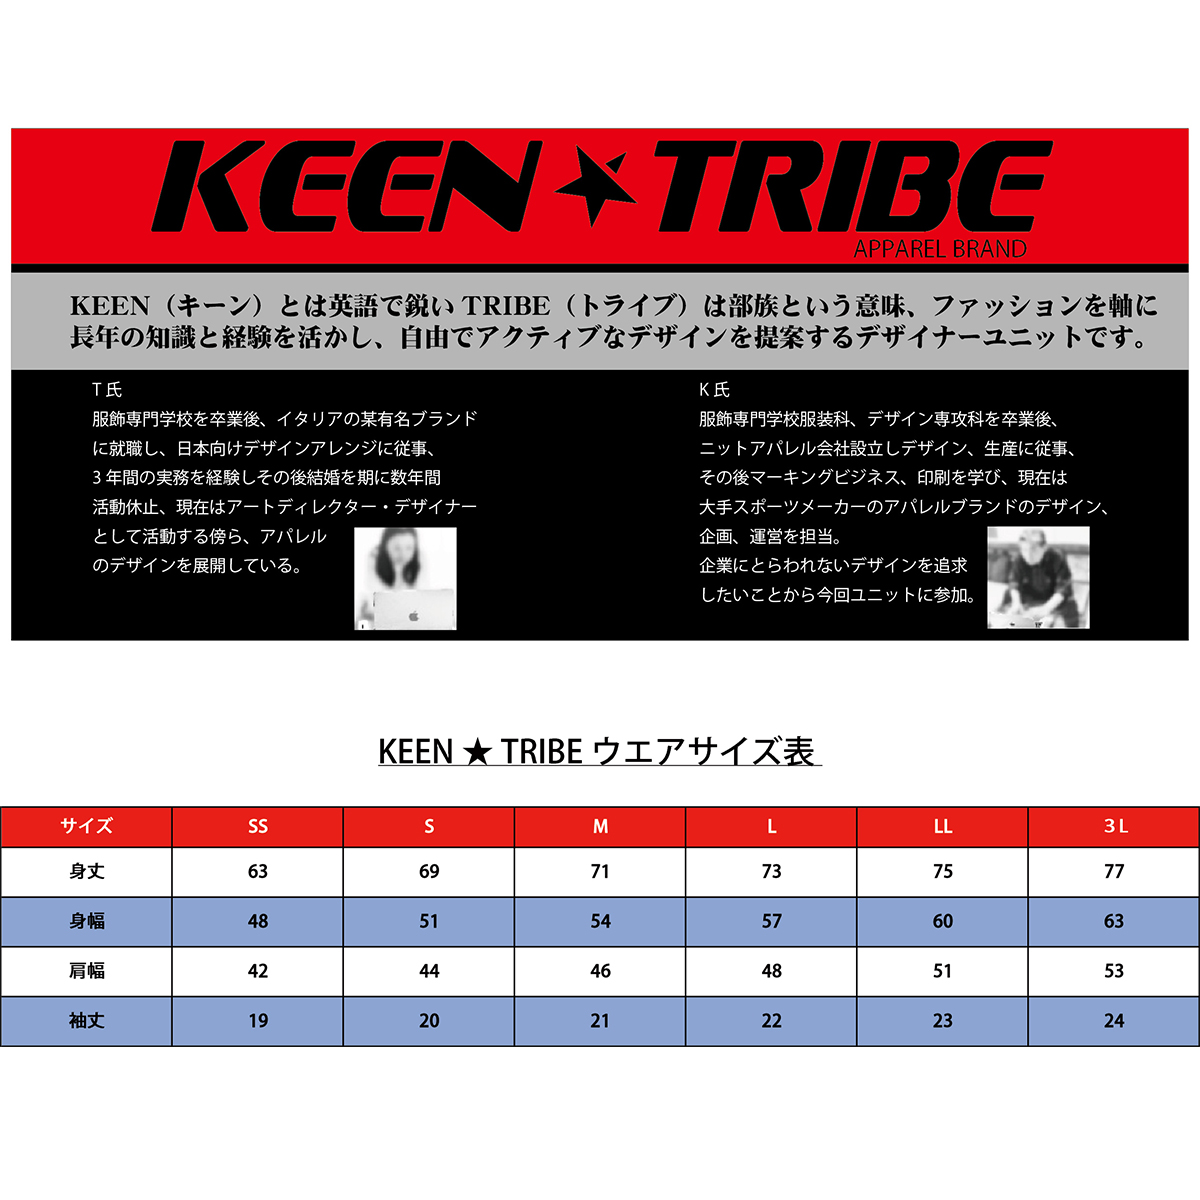 KEEN ★ TRIBE　KT-47(受注生産)